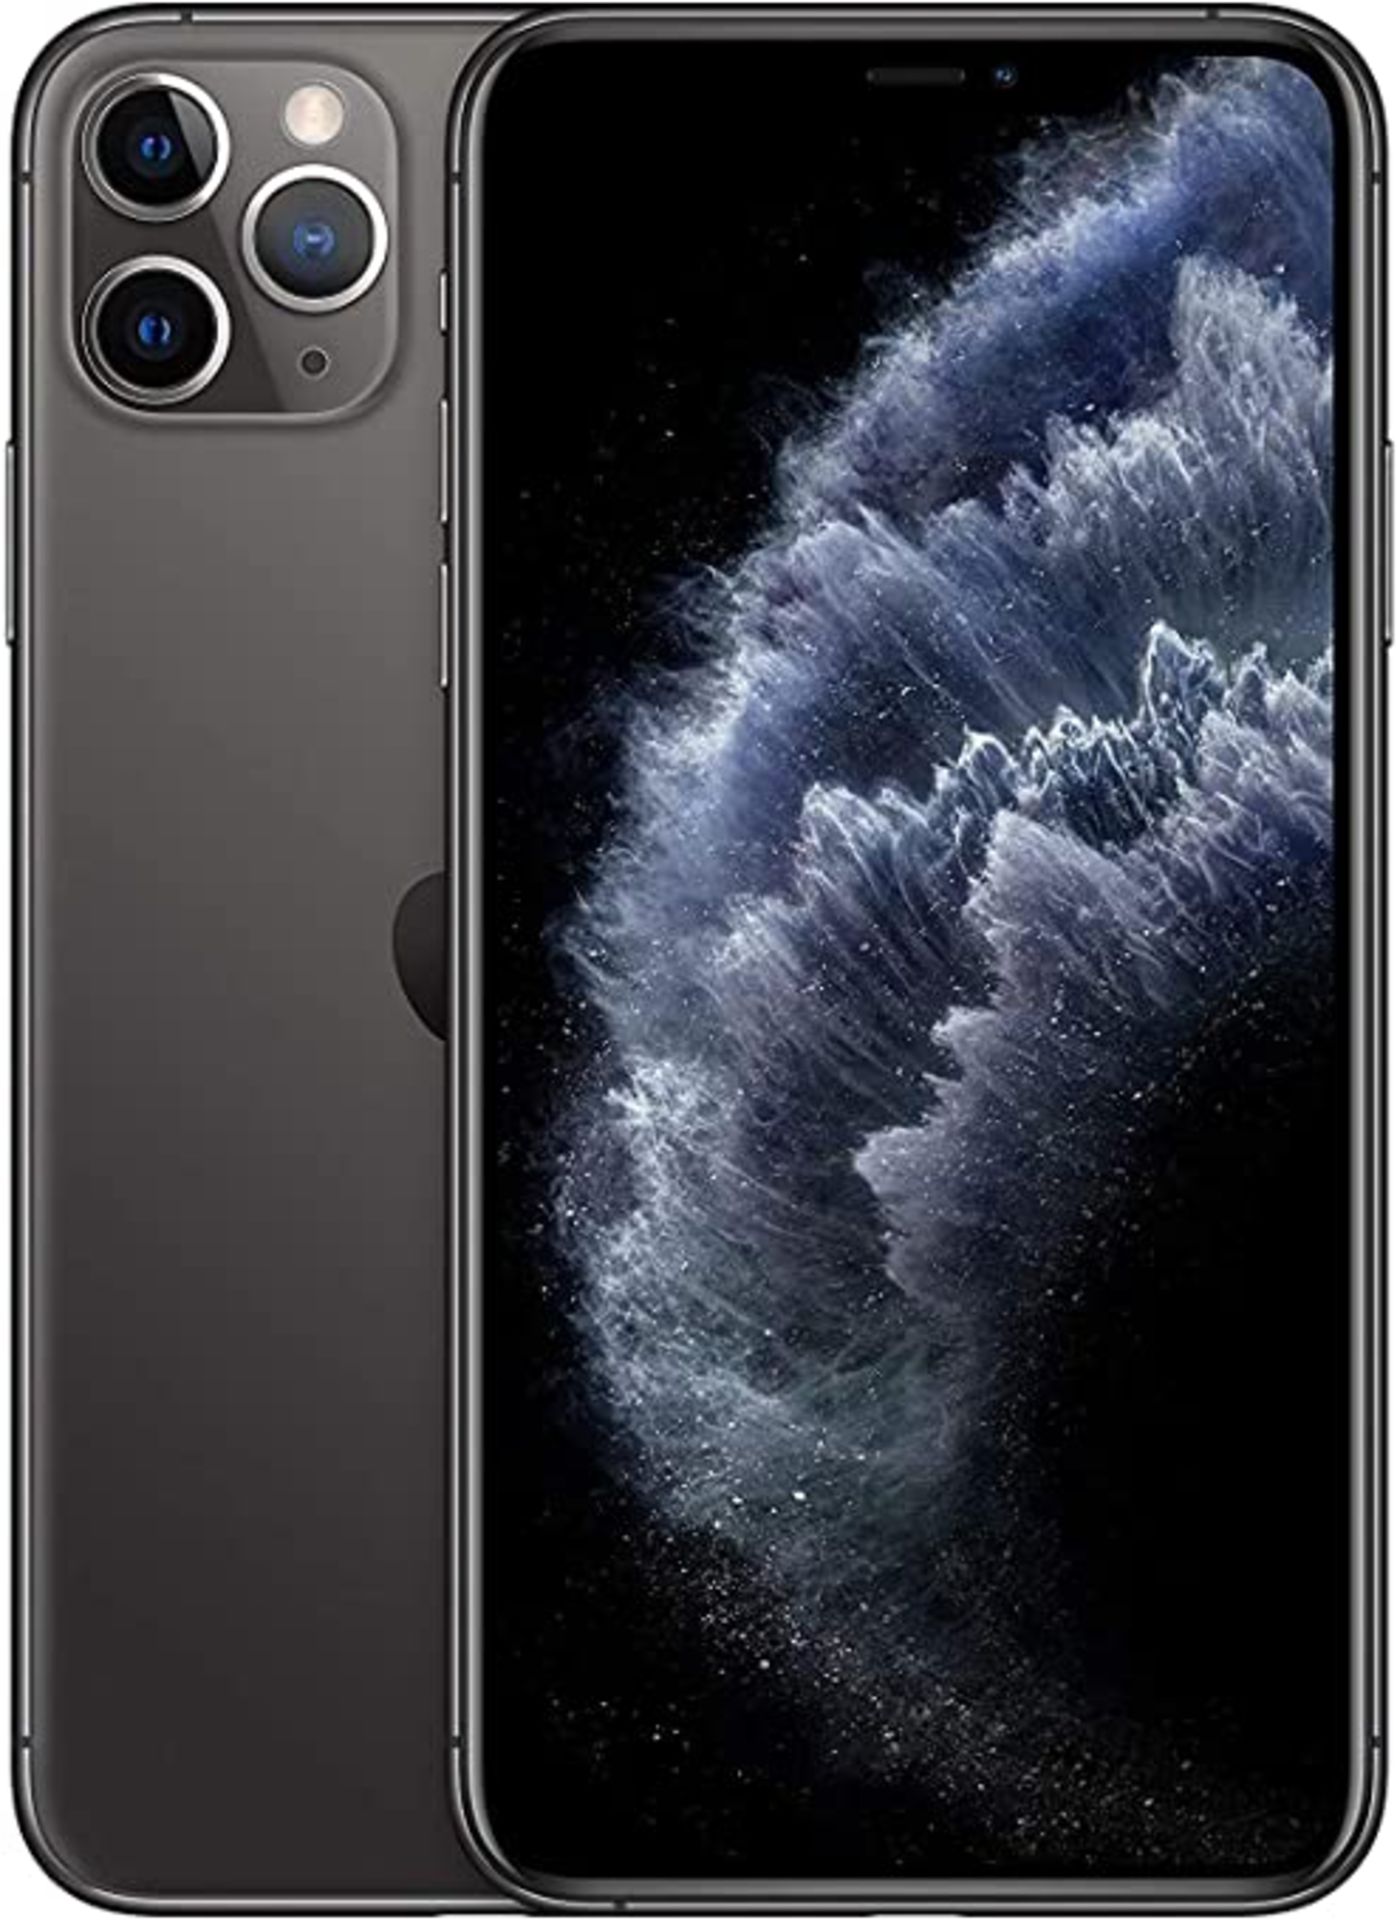 + VAT Grade A Apple iPhone 11 Pro Max Mobile Phone - 64Gb - Black/White/Red - Item Is Available